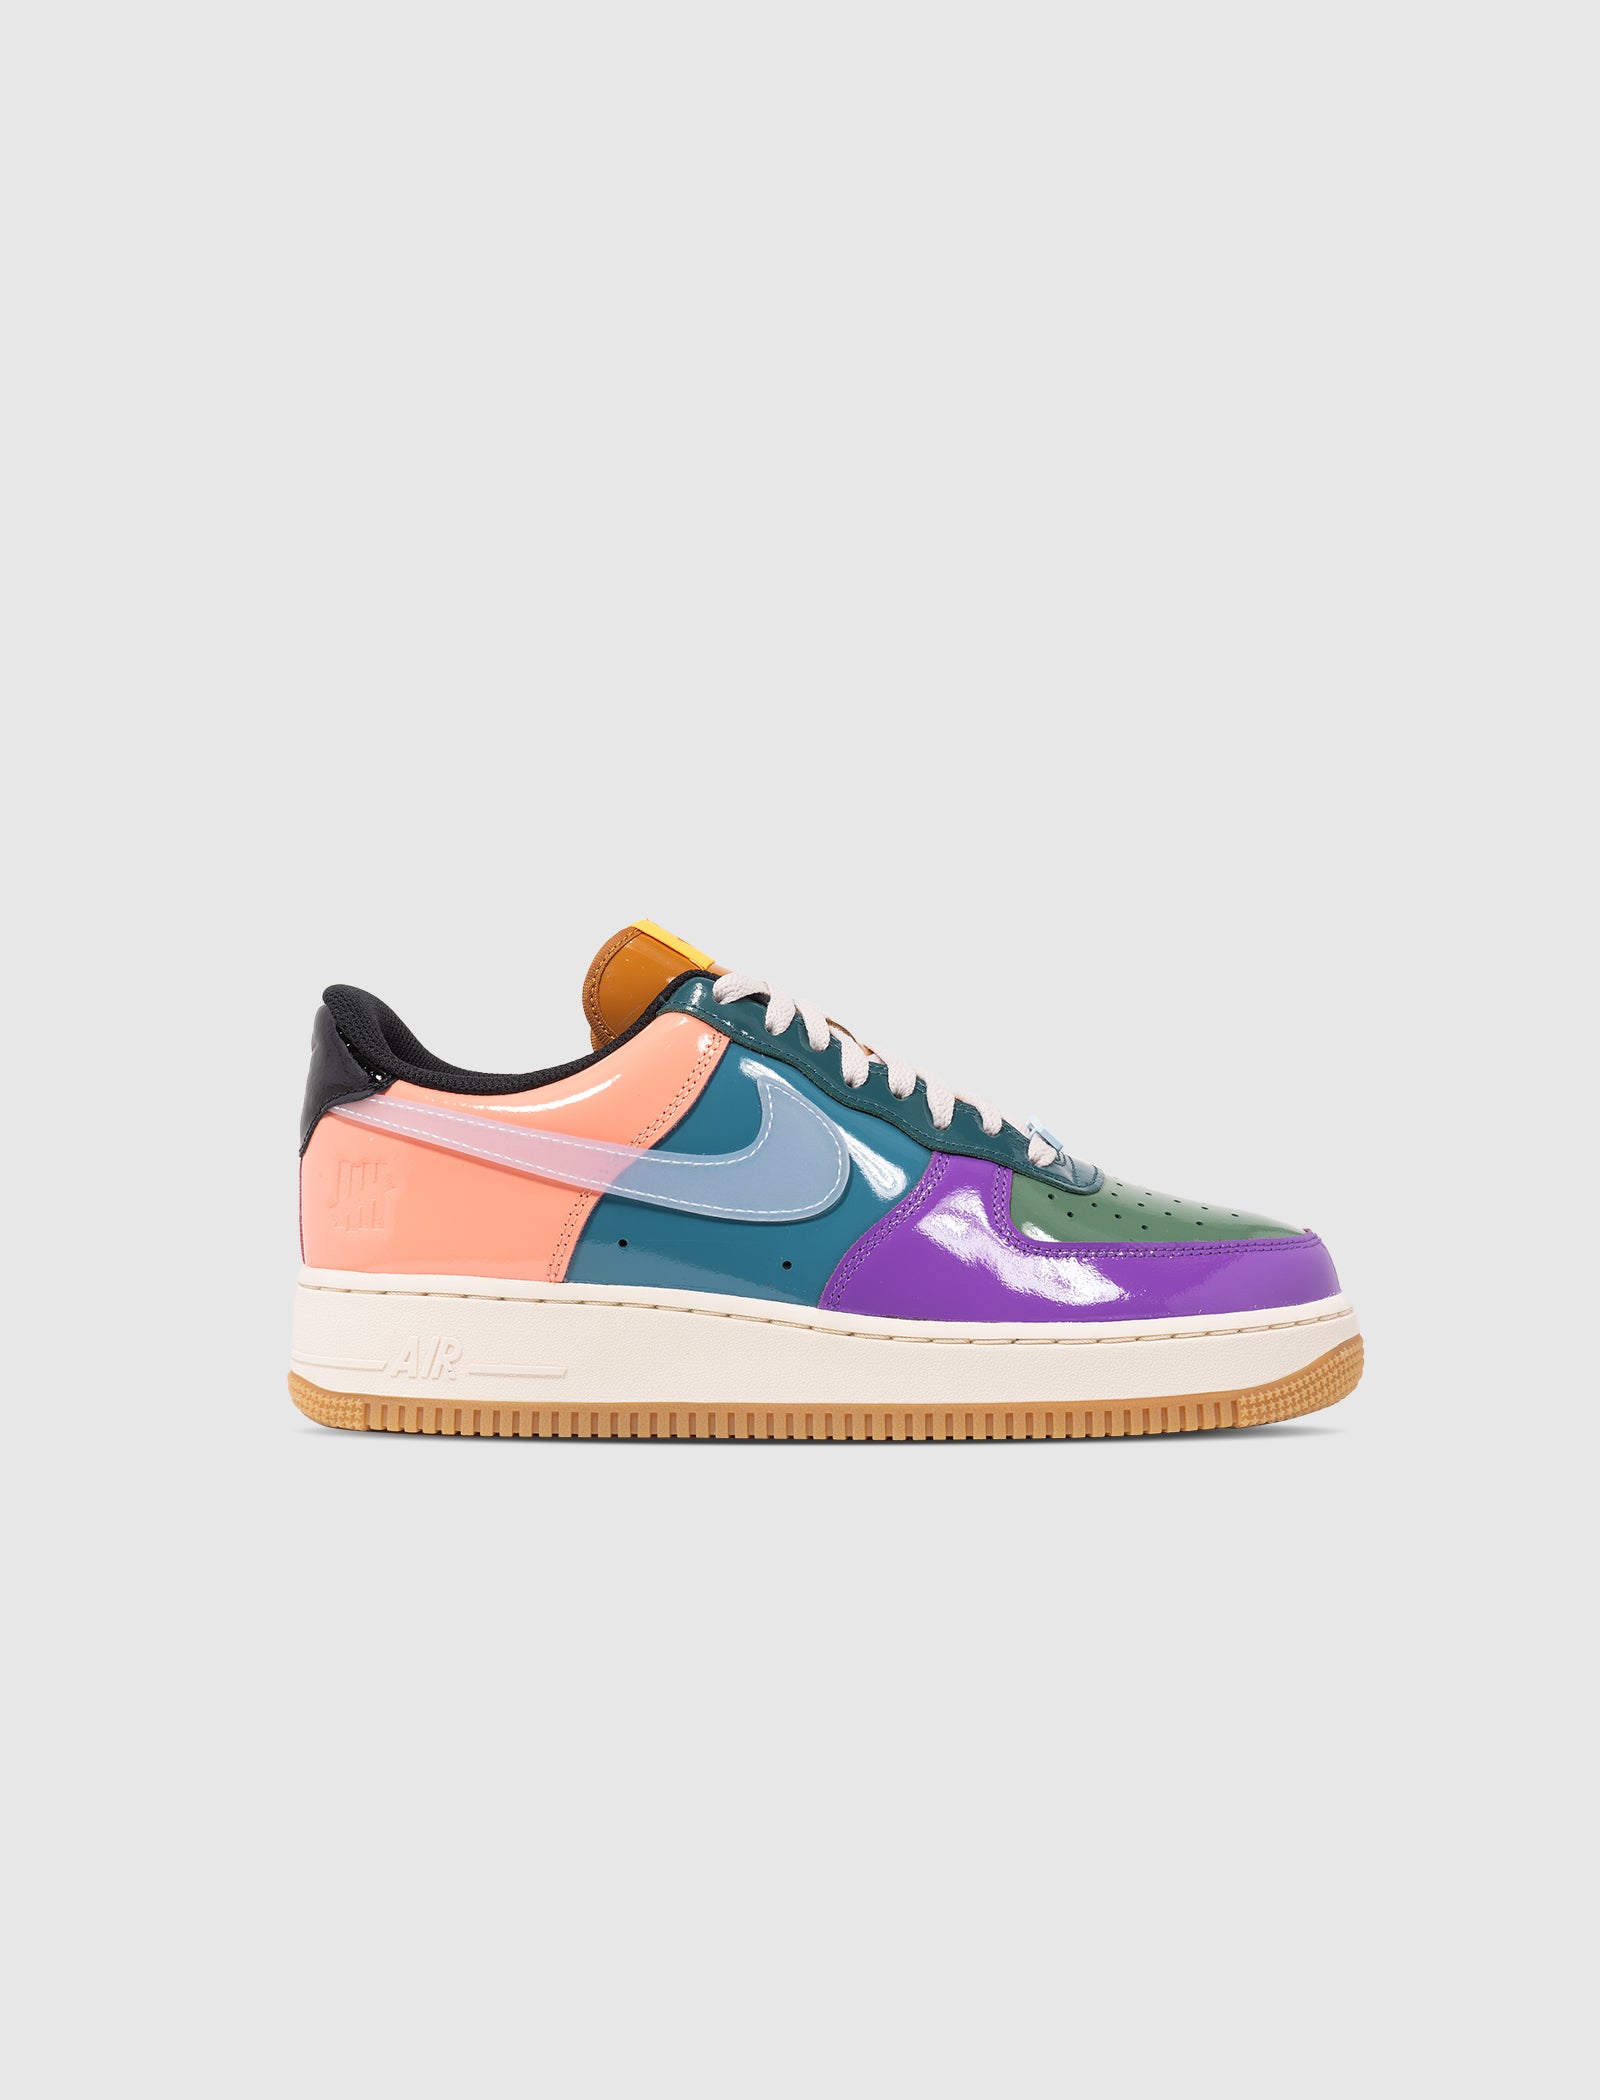 AIR FORCE 1 LOW SP X UNDFTD "MULTI-PATENT"